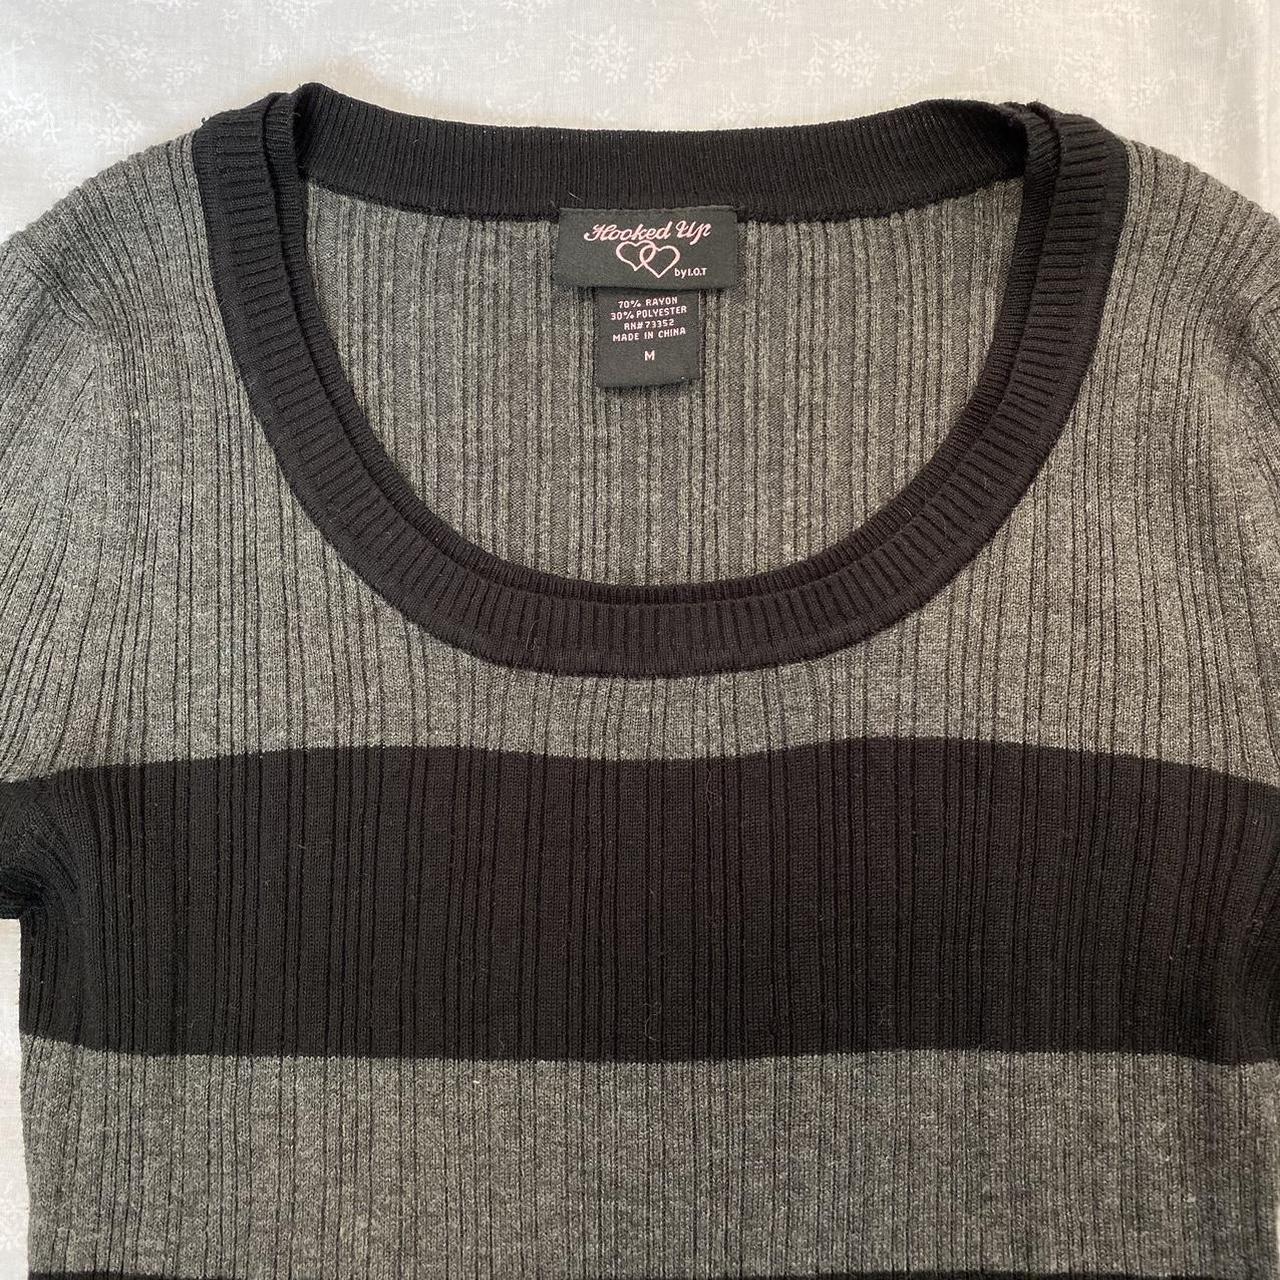 Hooked Up by IOT Women's Black and Grey Jumper (6)